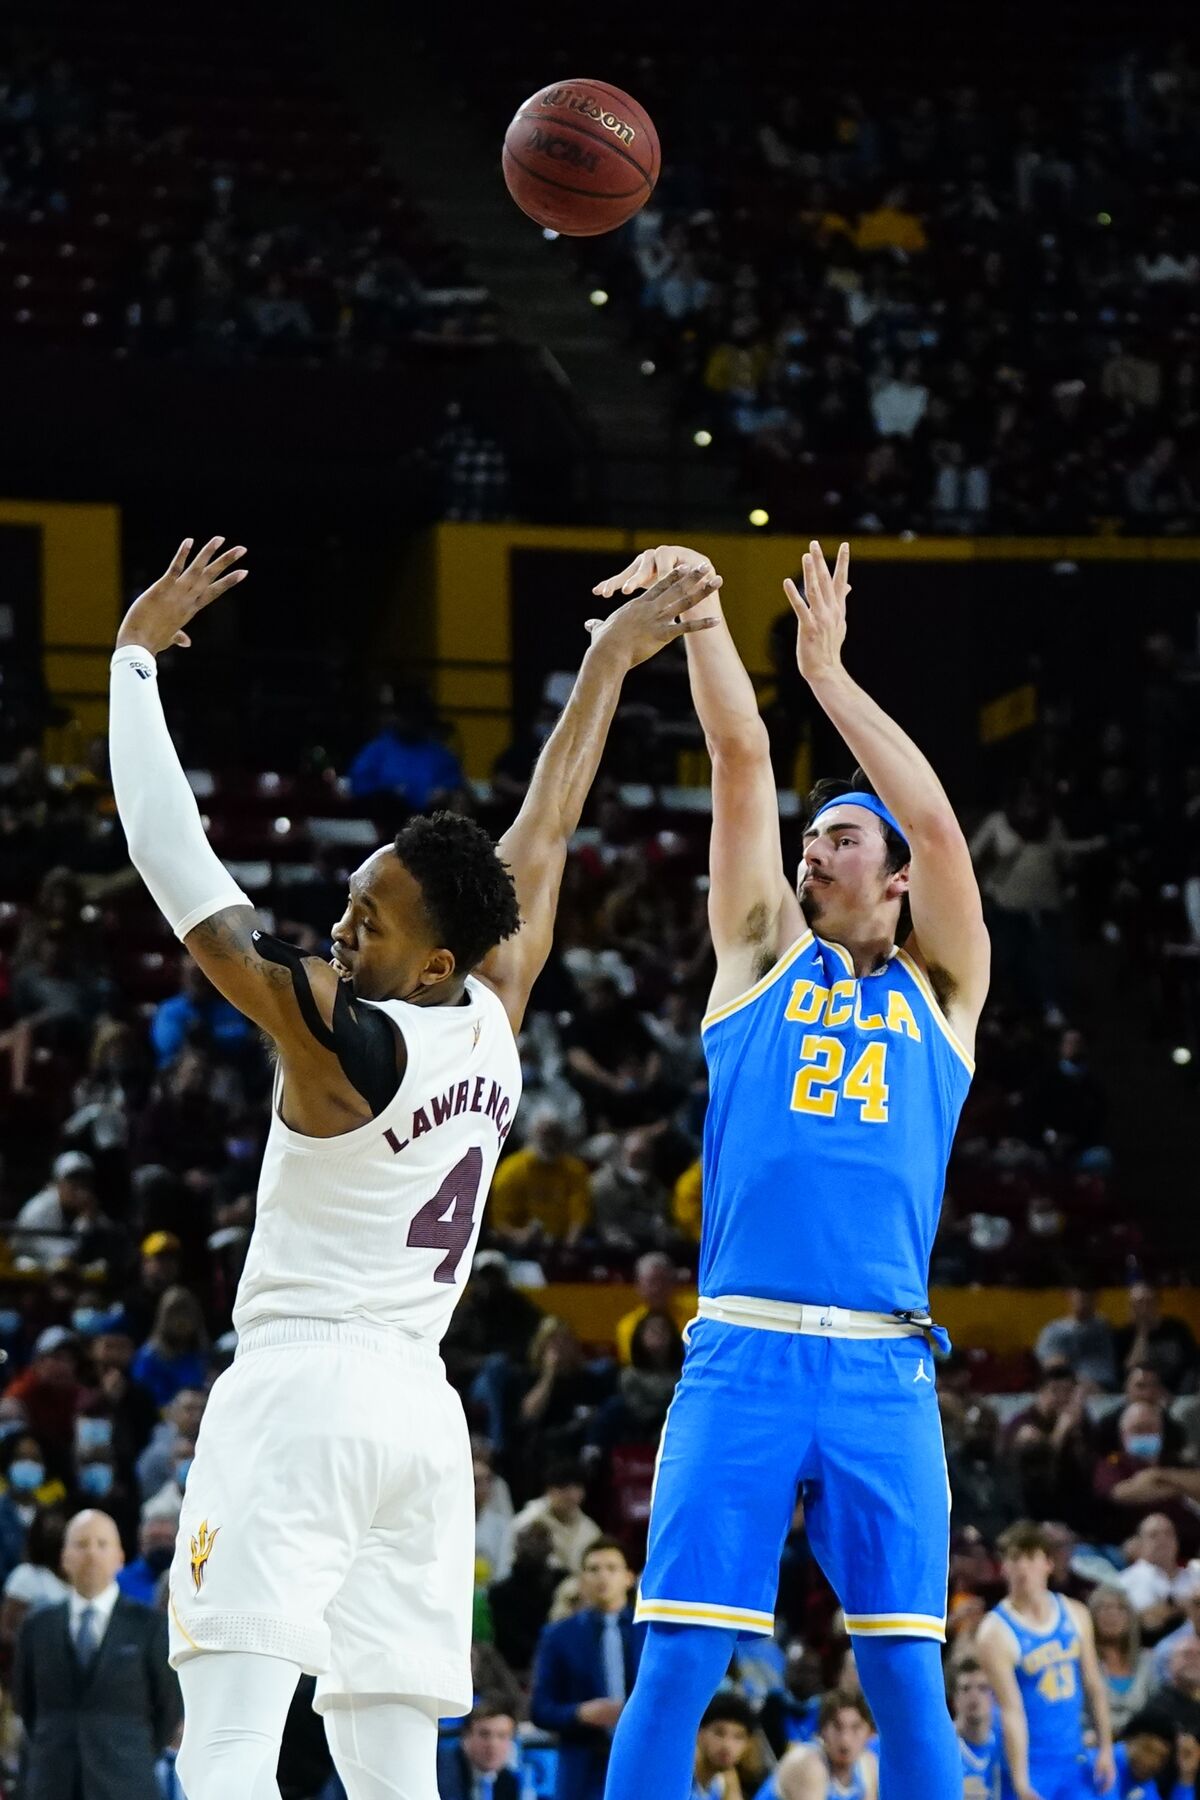 The Bruins' Jaime Jaquez Jr. attempts a three-pointer over Arizona State's Kimani Lawrence in the first half Feb. 5, 2022.